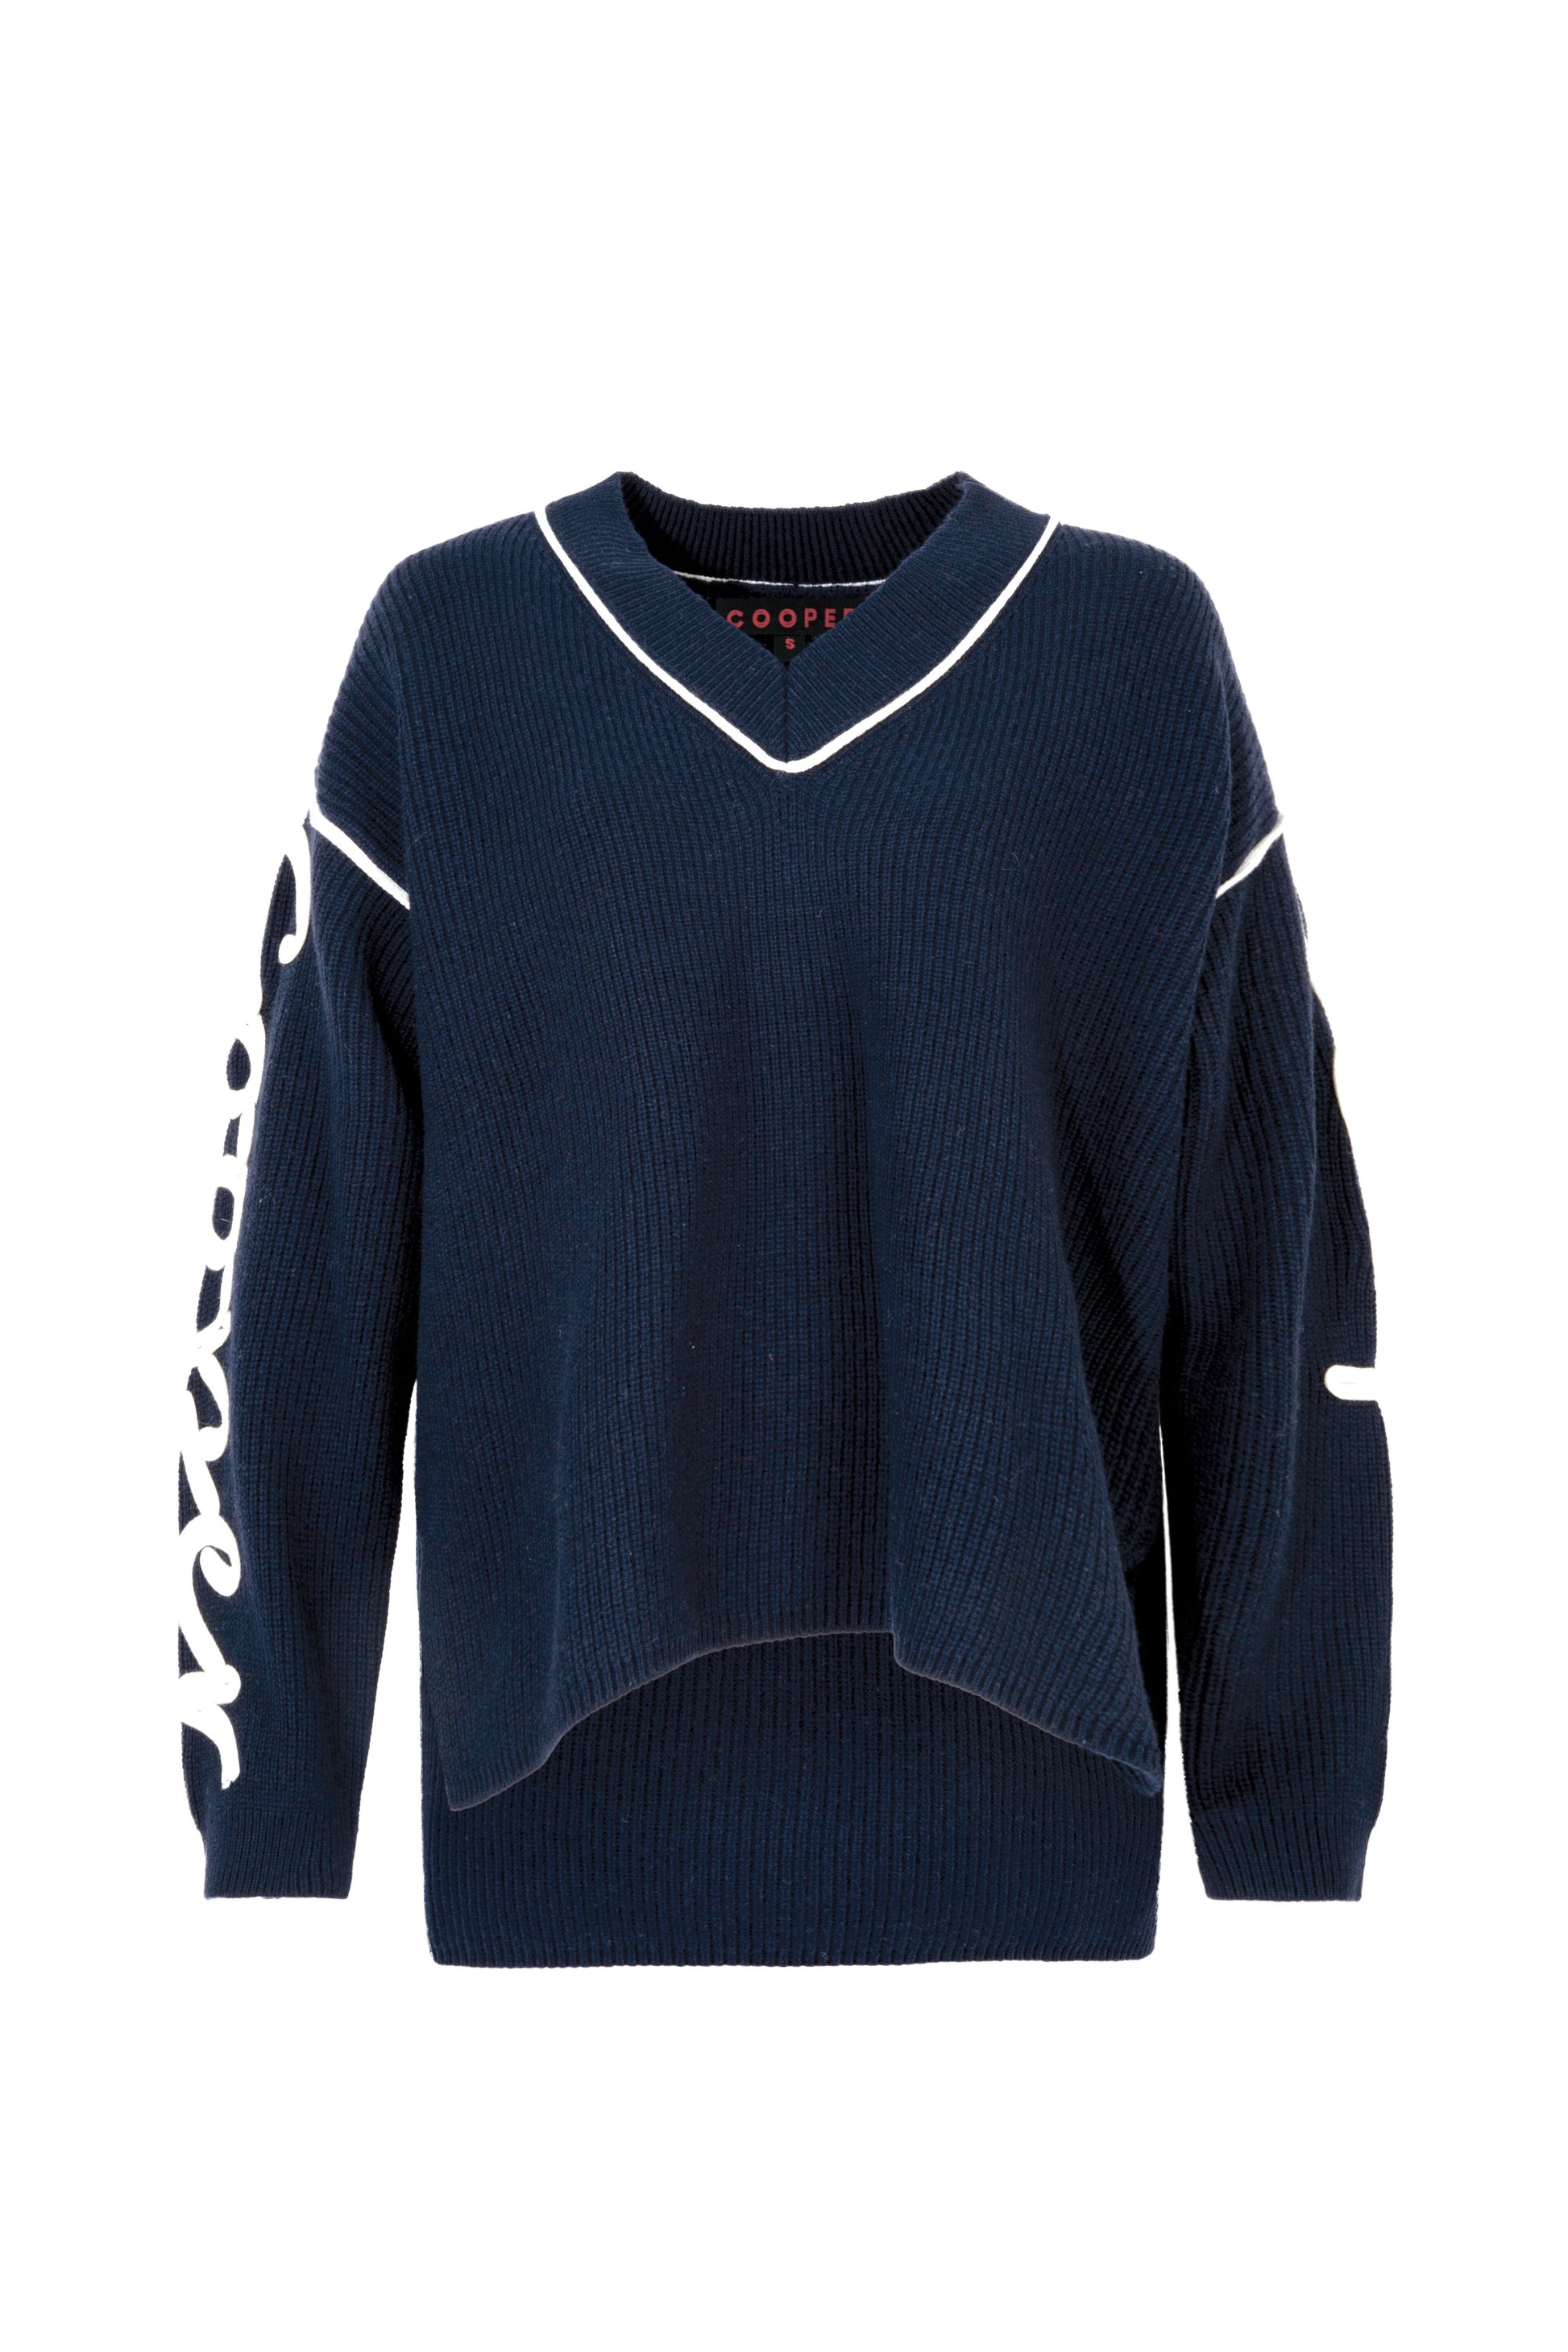 COOPER ROPE ME IN JERSEY - NAVY - THE VOGUE STORE